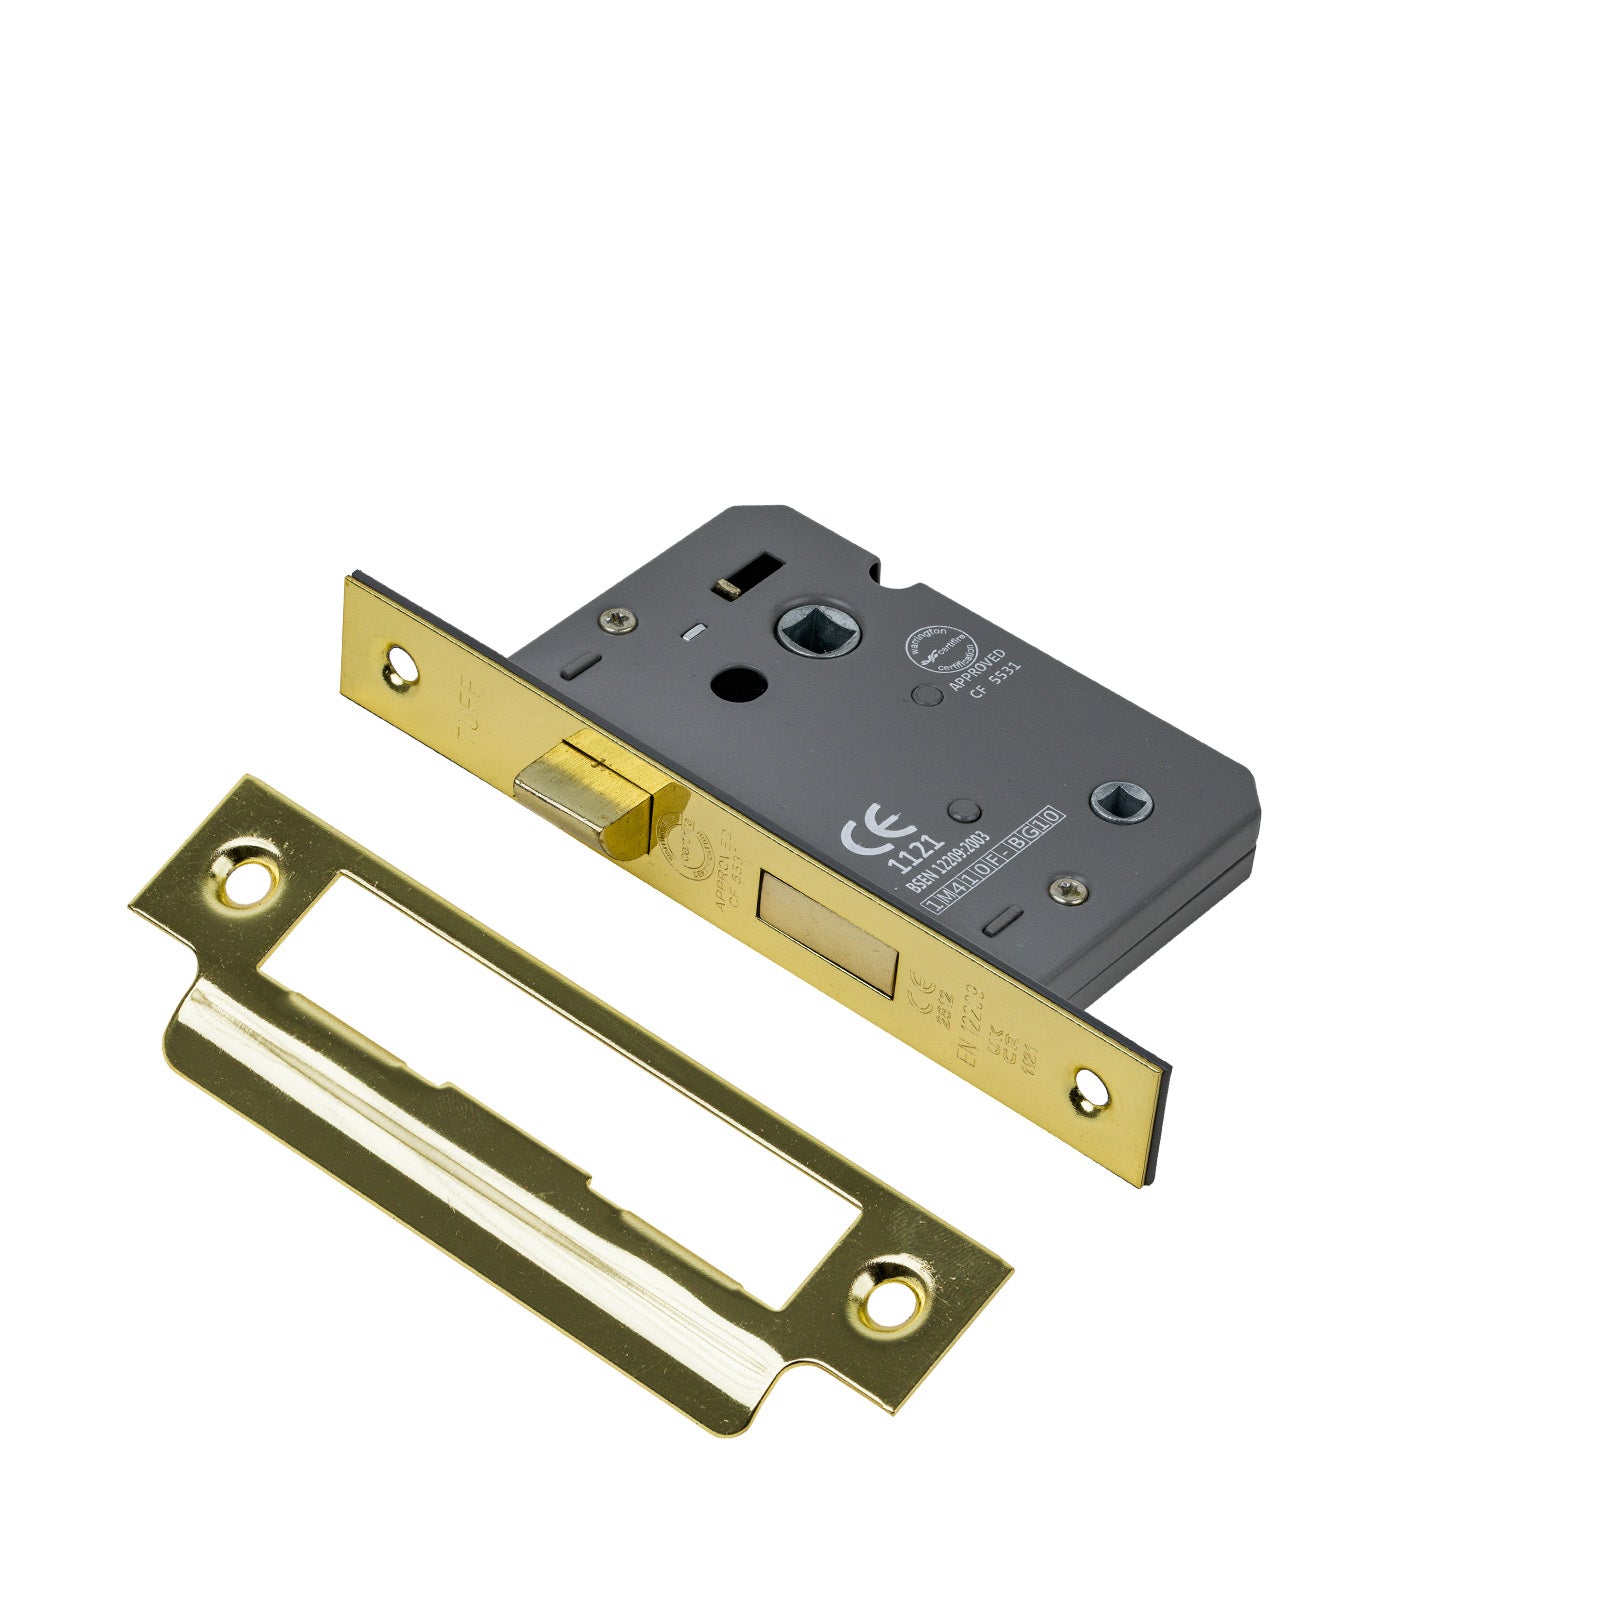 SHOW Bathroom Sash Lock - 2.5 Inch with Polished brass finished forend and striker plate